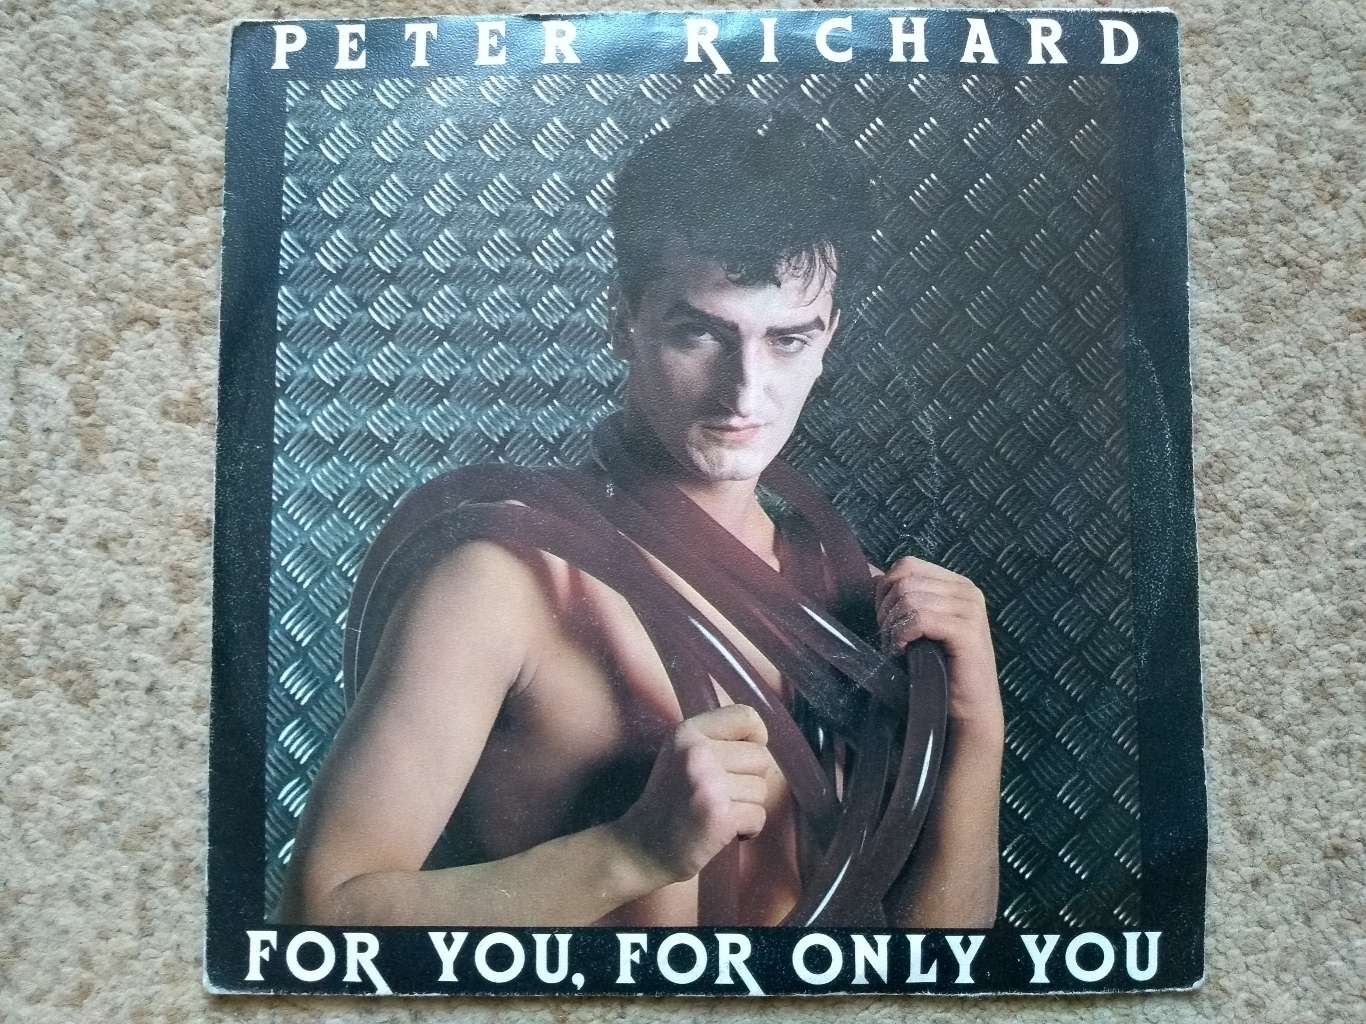 Peter Richard - Talk About Me, For you, for only you